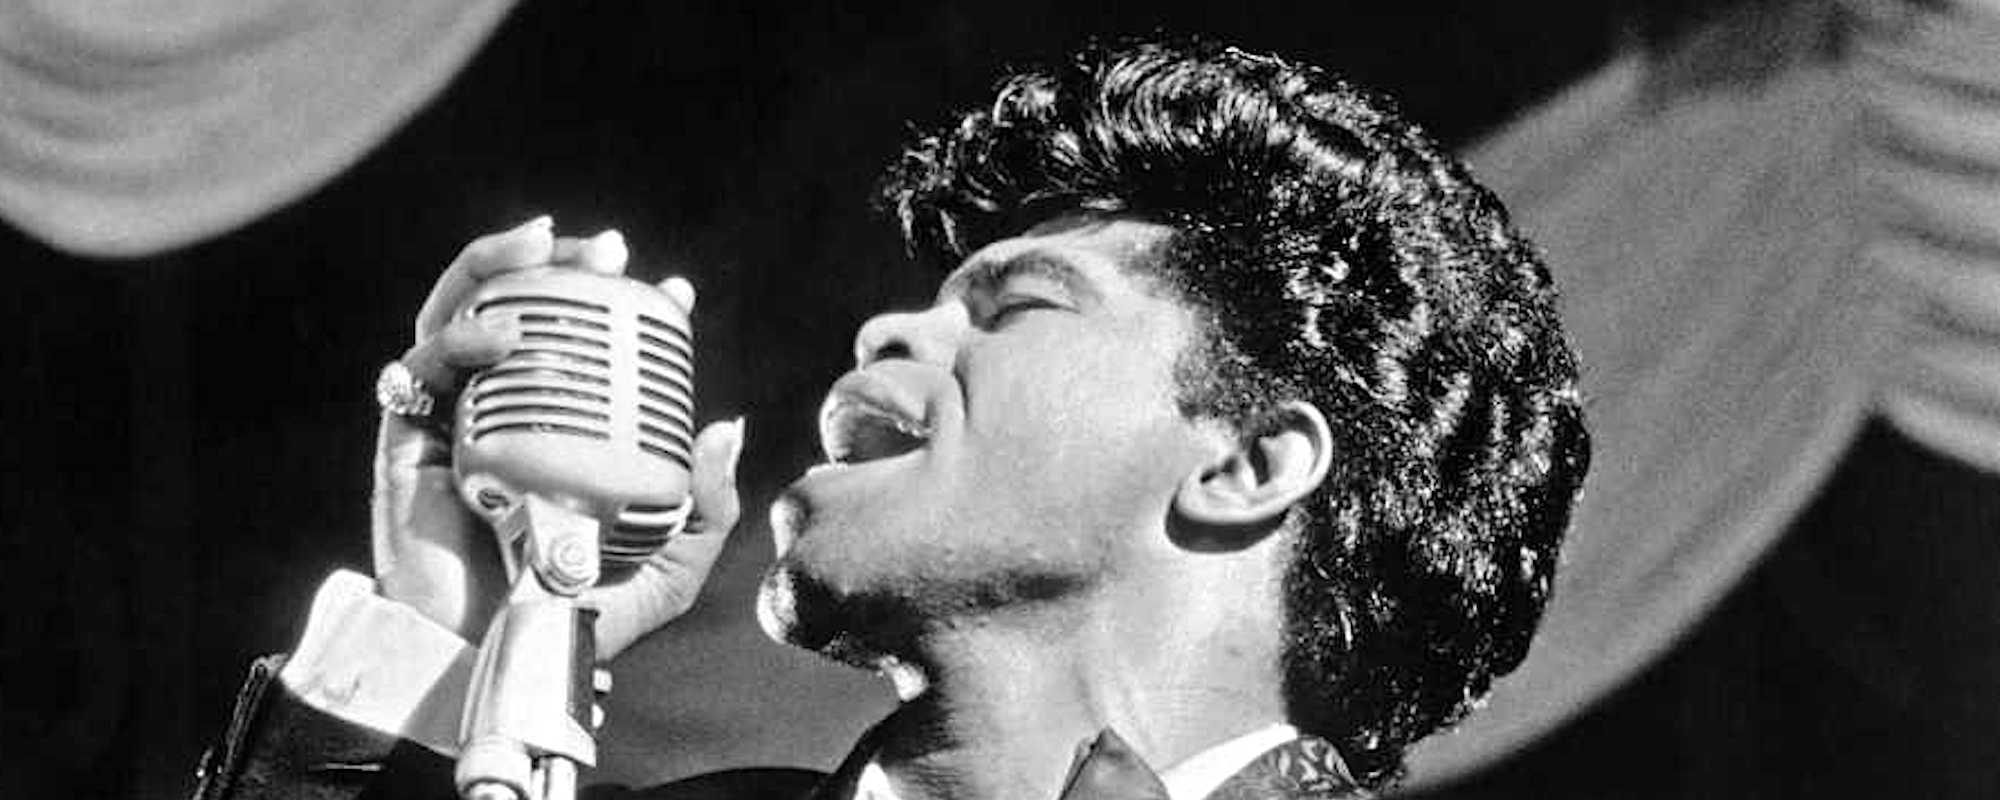 A&E Reveals James Brown Documentary Series Produced by Mick Jagger and The Roots